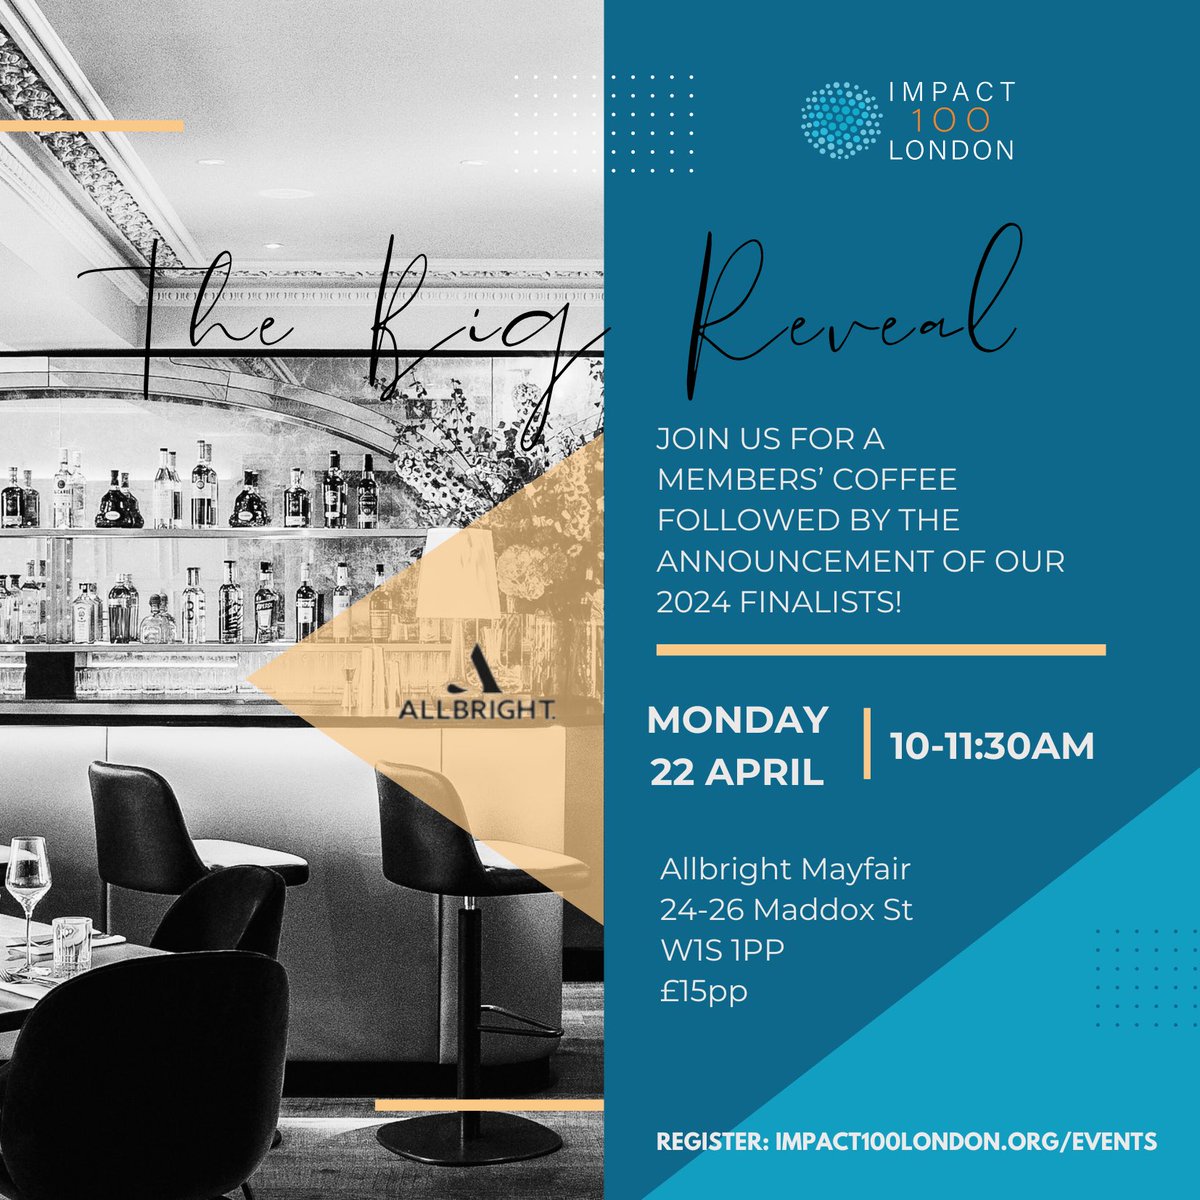 ⭐️The Big Reveal⭐️
Monday 22nd April

Join us at AllBright Mayfair for coffee followed by the announcement of our 2024 finalists!

Register to attend using the 
link: impact100london.wildapricot.org/events

#impact100london #collectivephilanthropy #impact100 #empoweringwomen #collectiveimpact